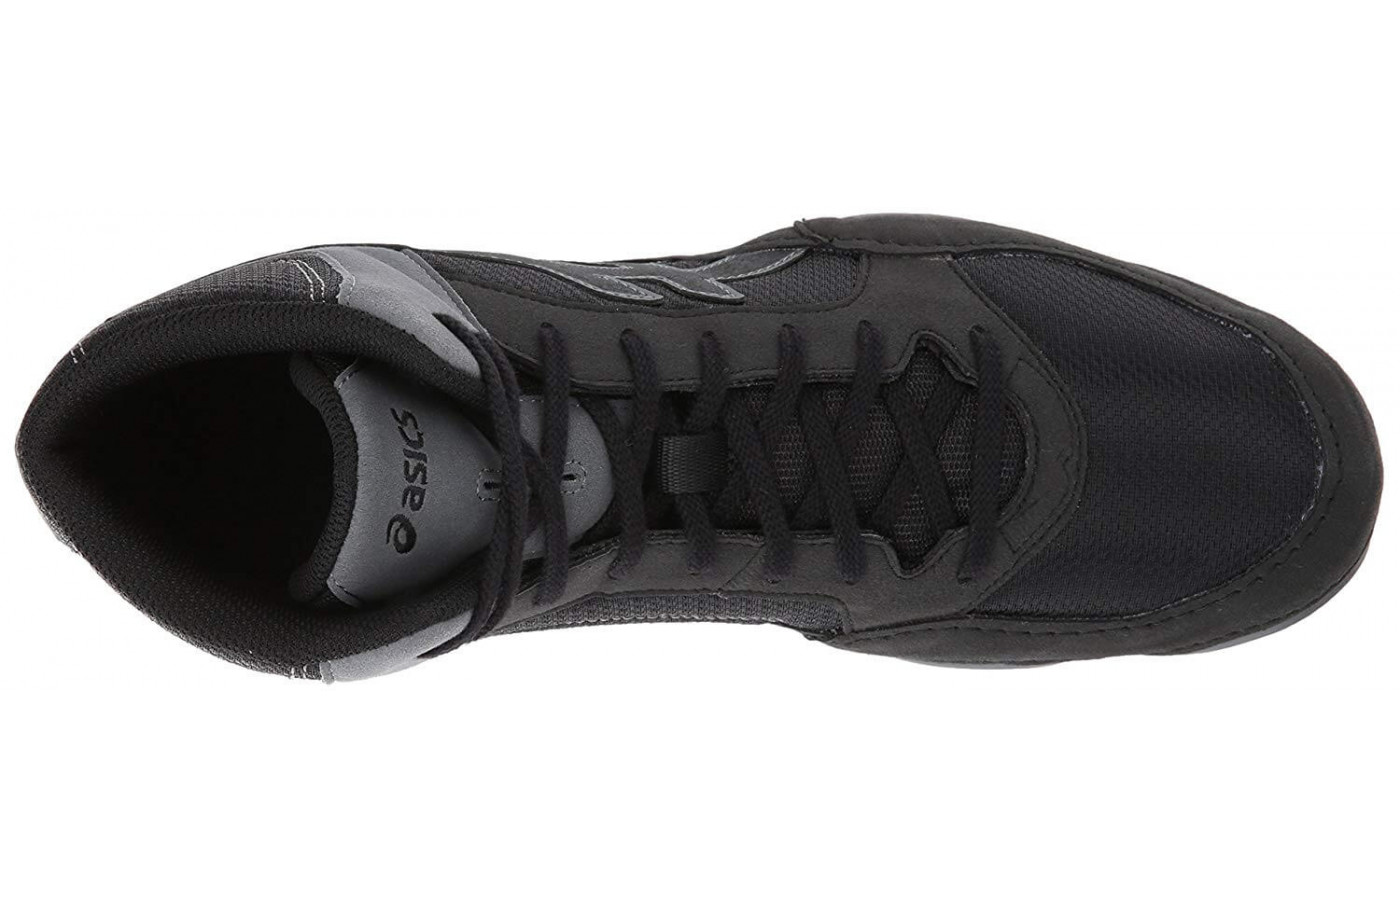 The Snapdown 2's upper is made from mesh and synthetic leather.